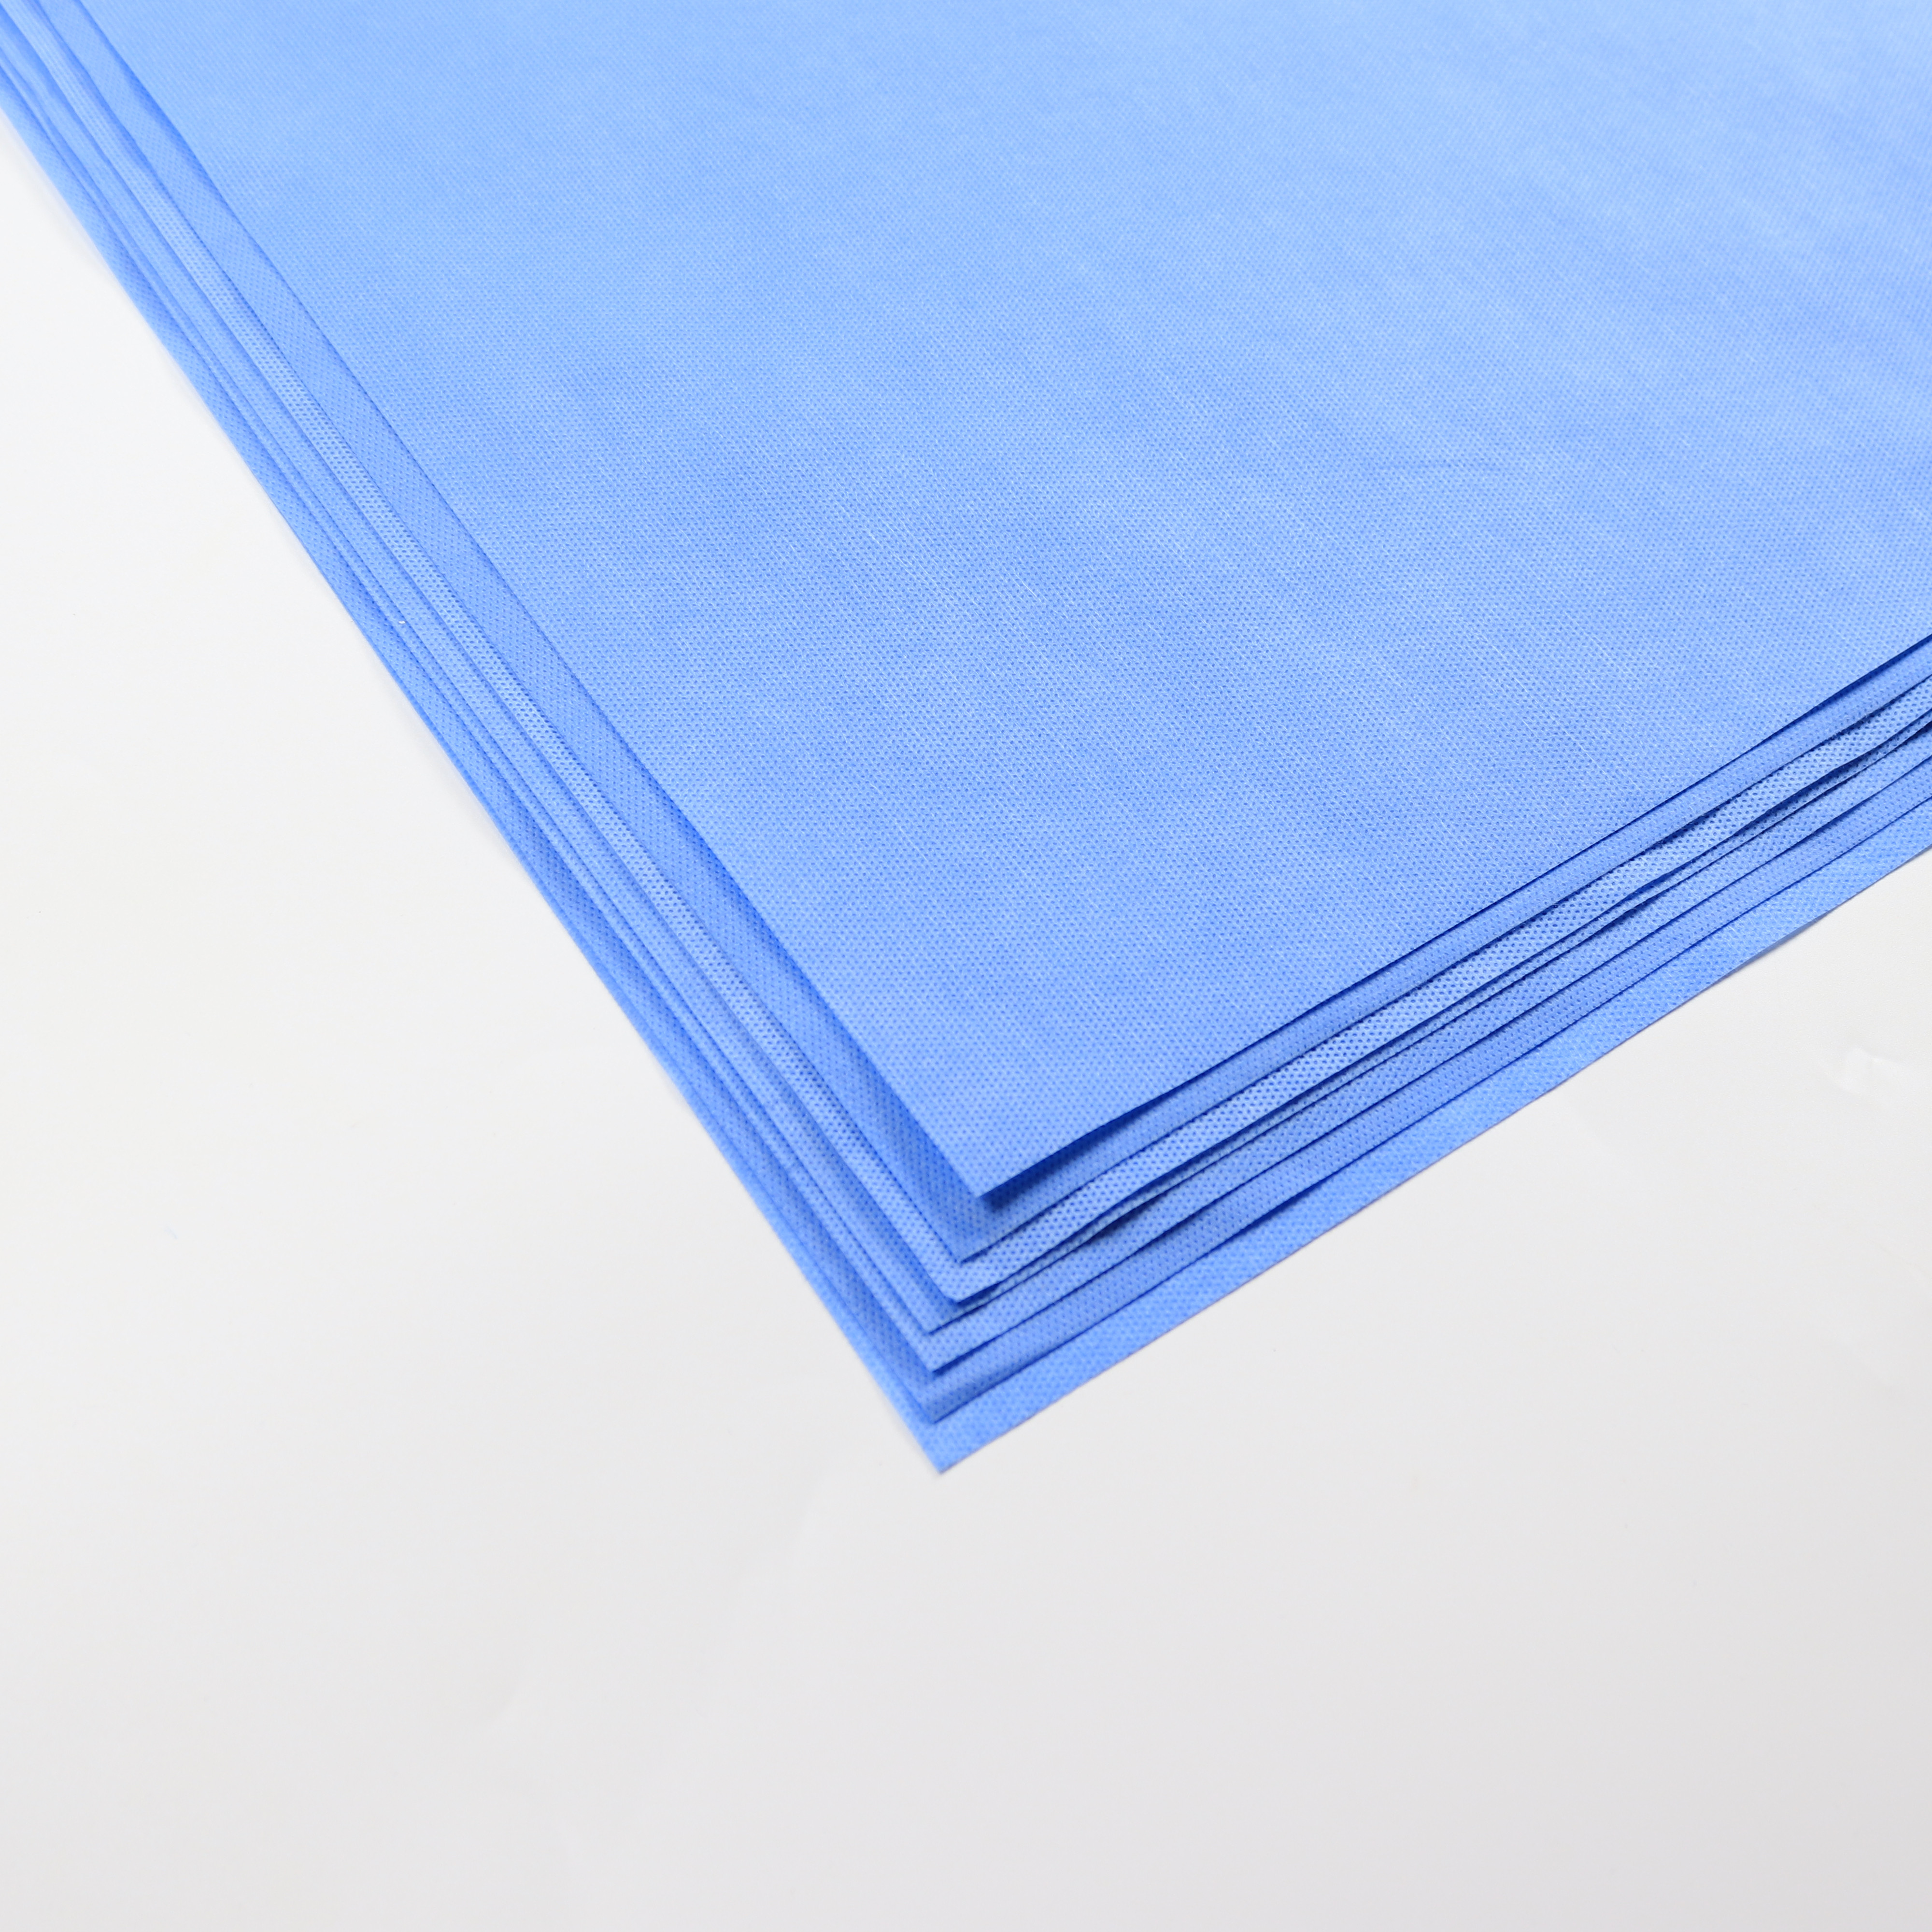 Wholesale high quality 100% PP medical Spunbond blue non woven fabric